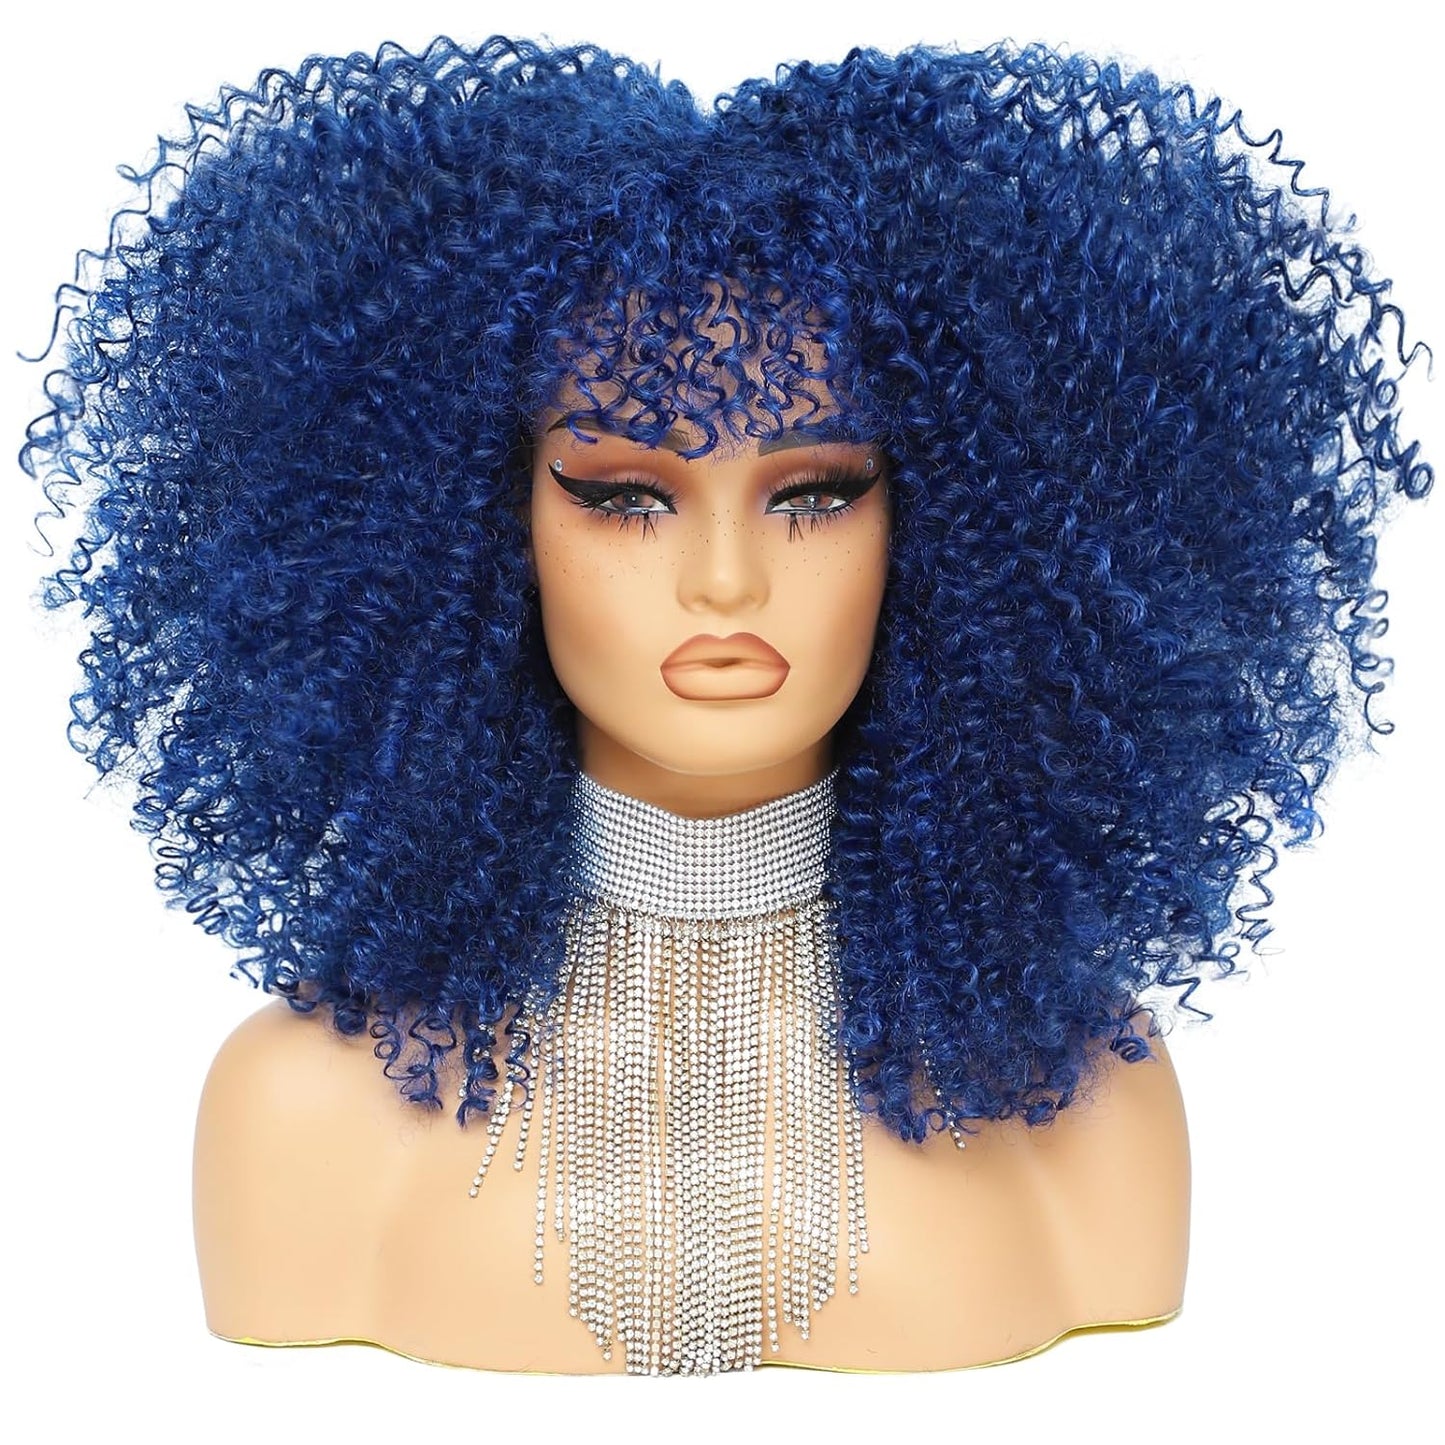 16 Inch Curly. Afro Kinky Wig Synthetic Fiber Glueless Full and Fluffy Long Curly Wig for Fashion Women (16 Inch, Black)